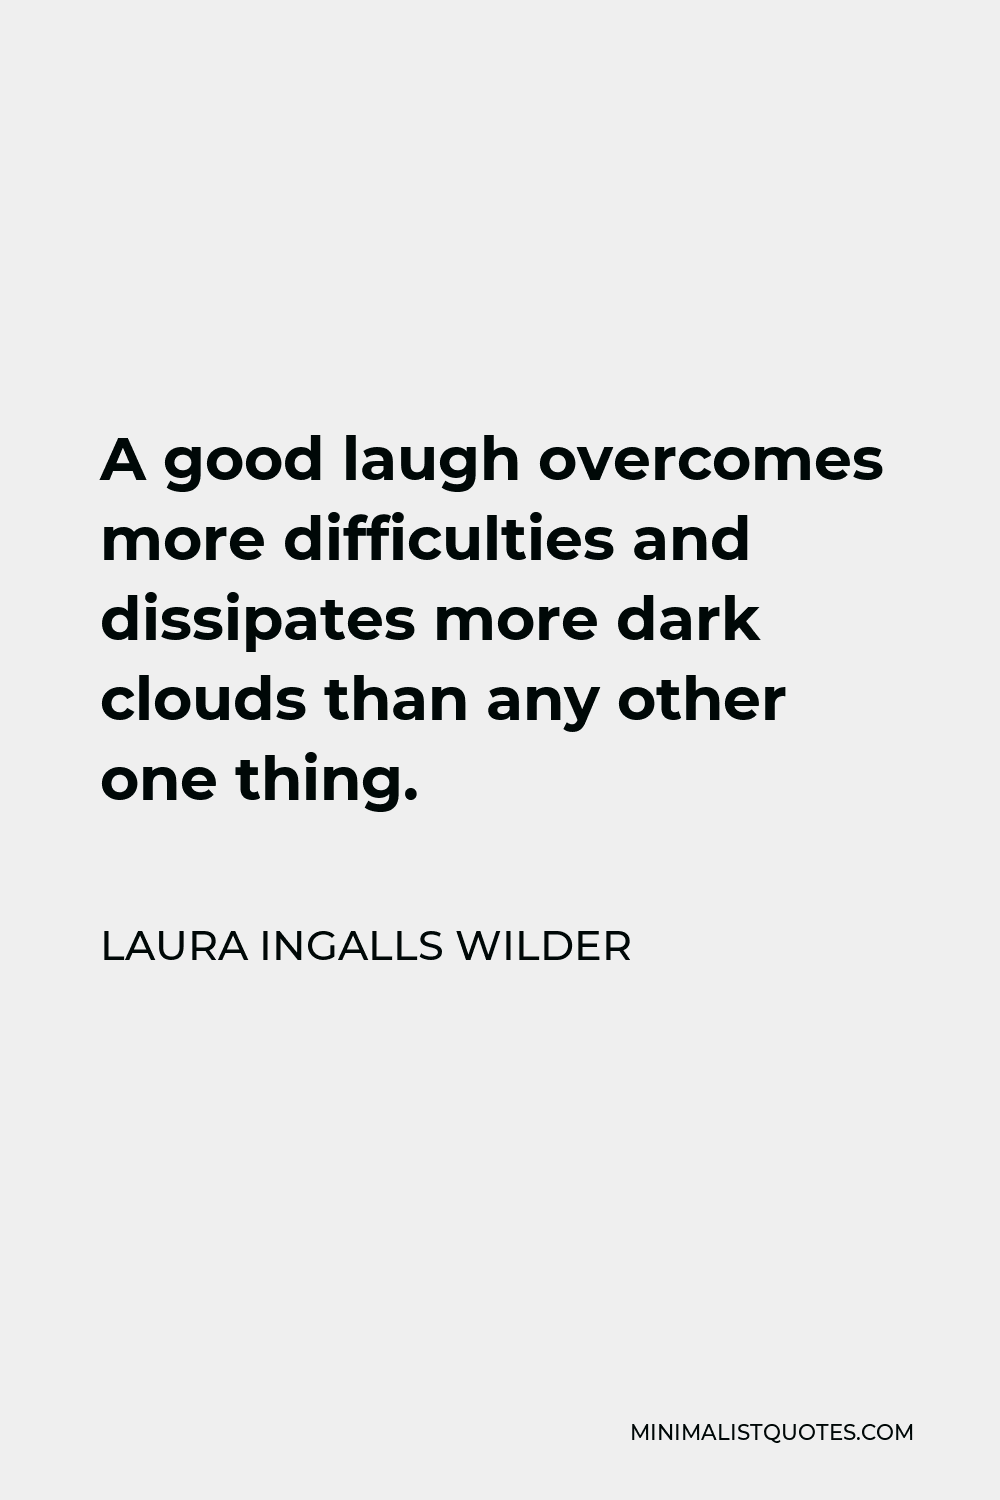 Laura Ingalls Wilder Quote - A good laugh overcomes more difficulties and dissipates more dark clouds than any other one thing.